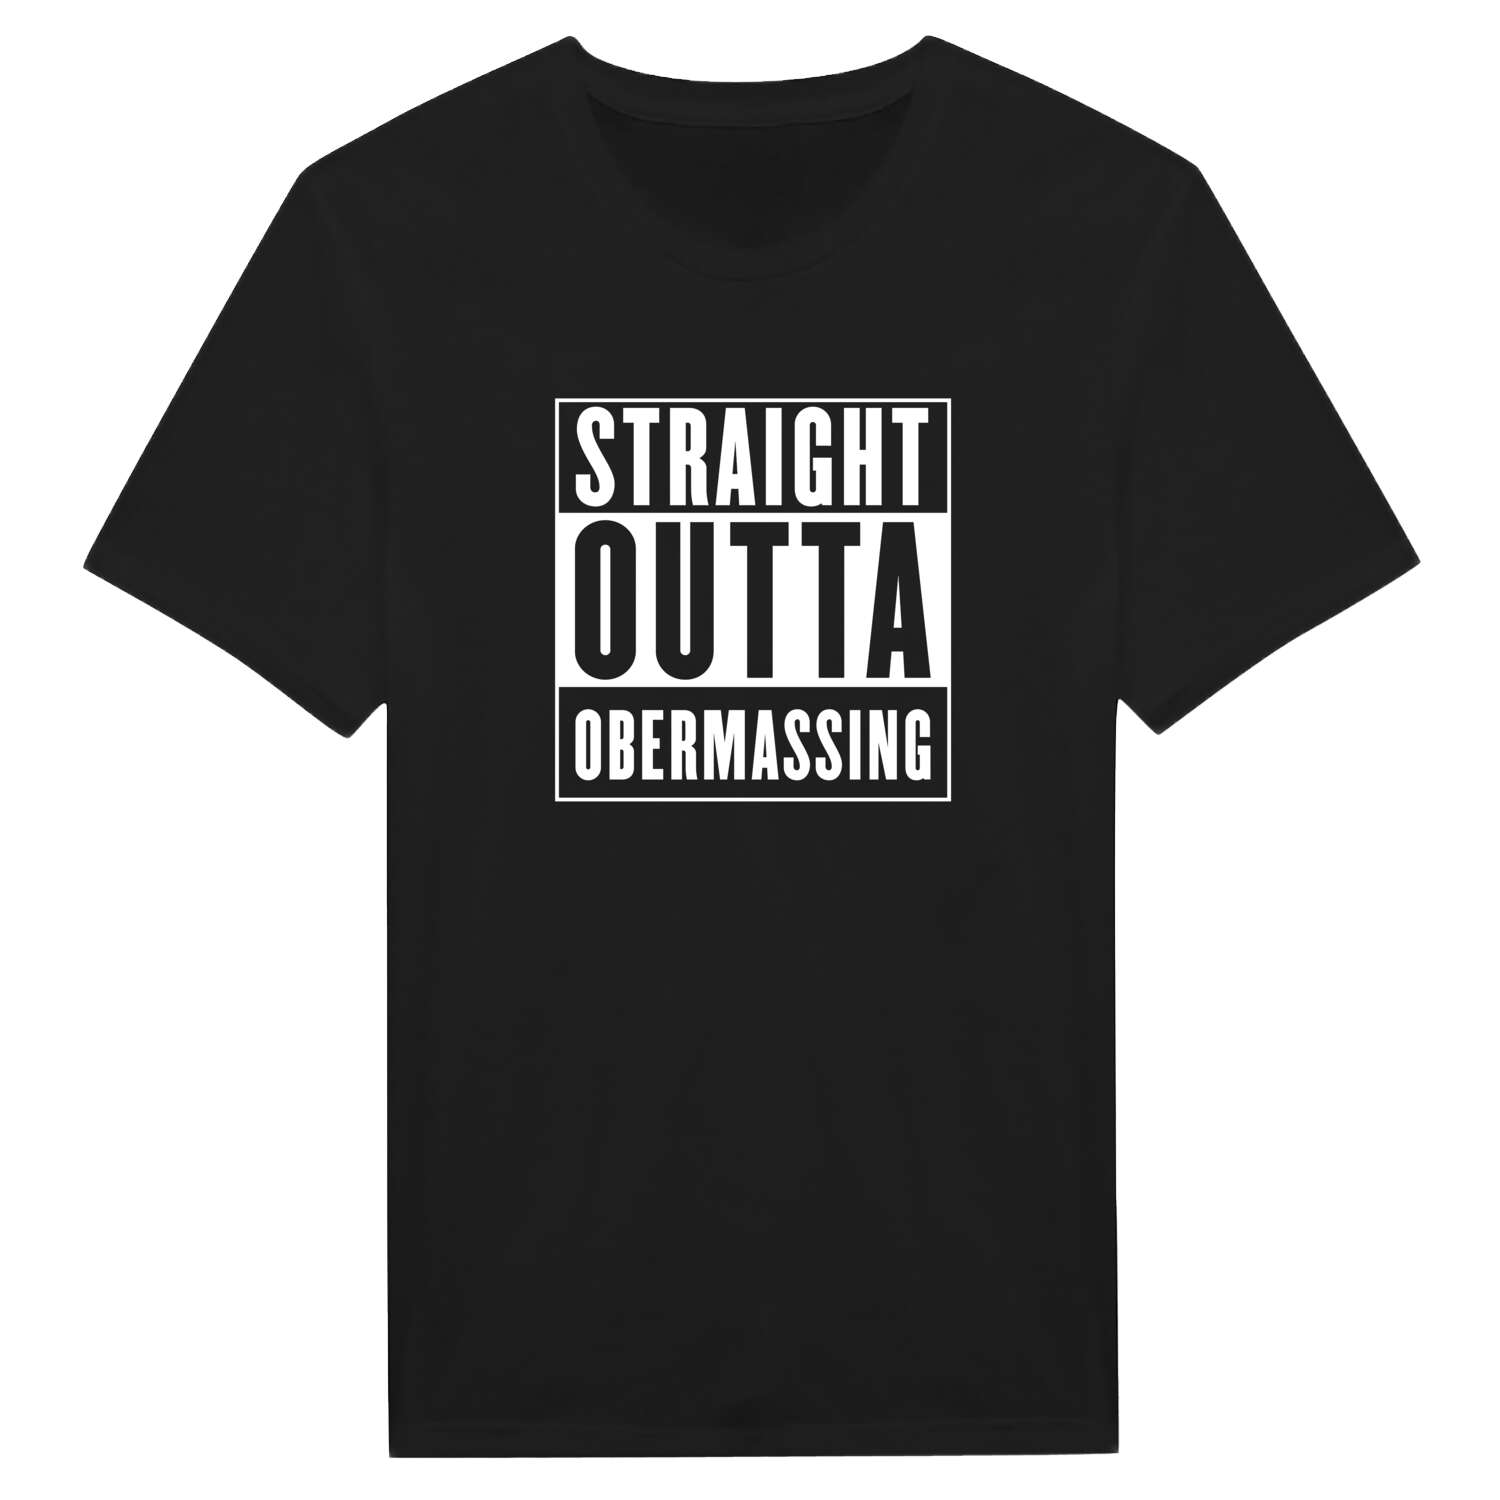 Obermassing T-Shirt »Straight Outta«